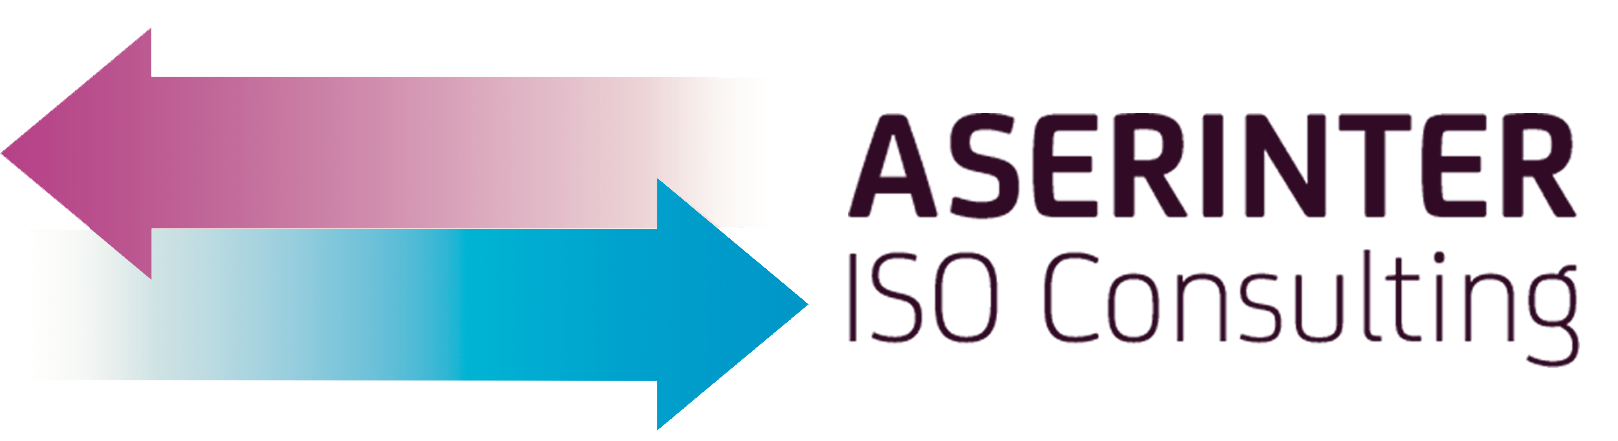 Aserinter ISO Consulting